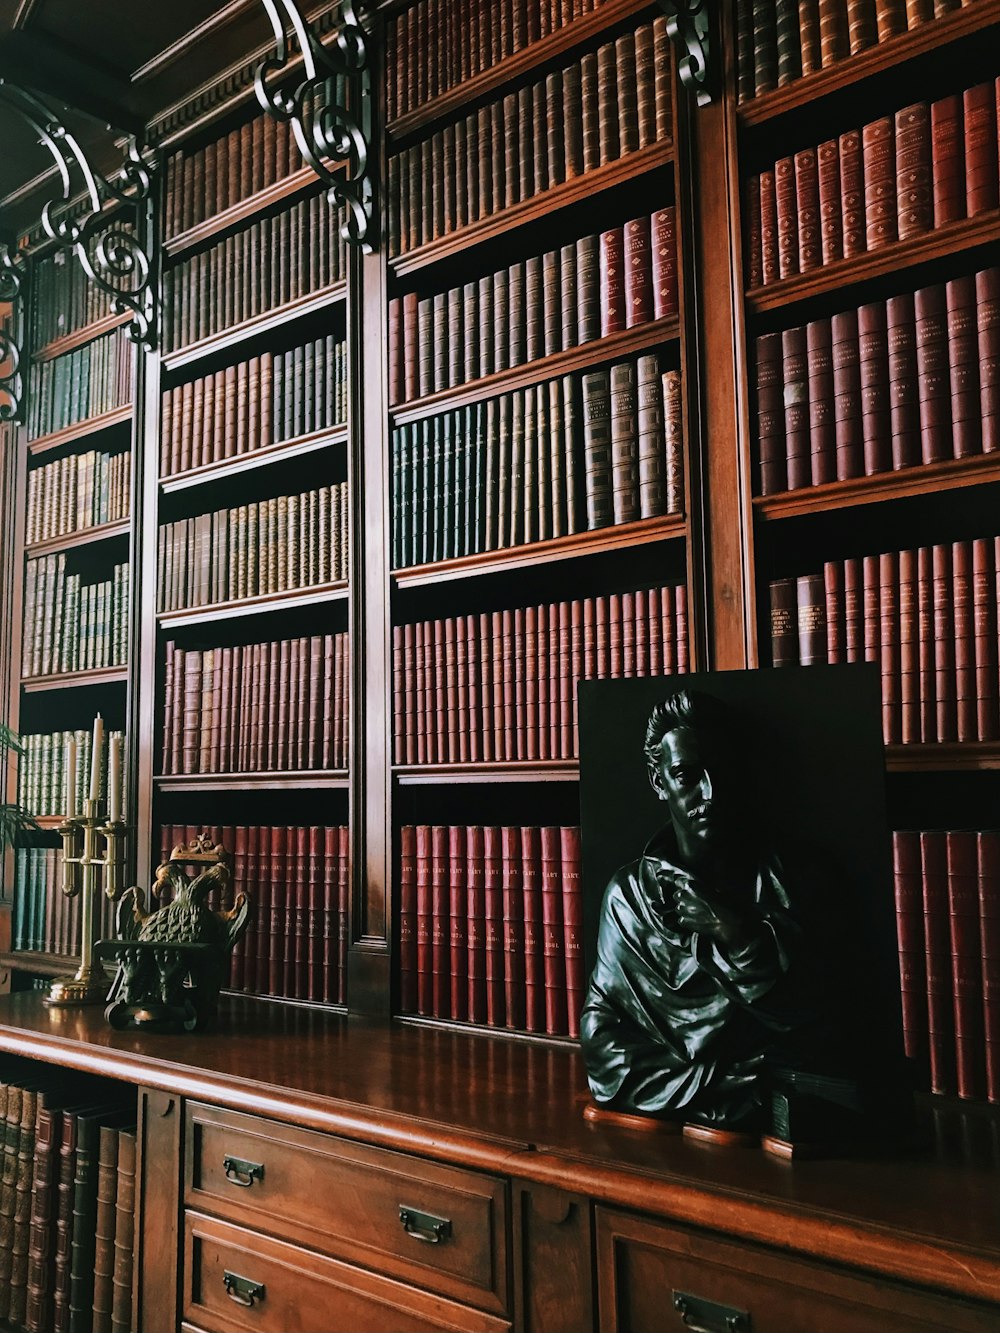 a statue of a man sitting on a desk in front of a bookshelf